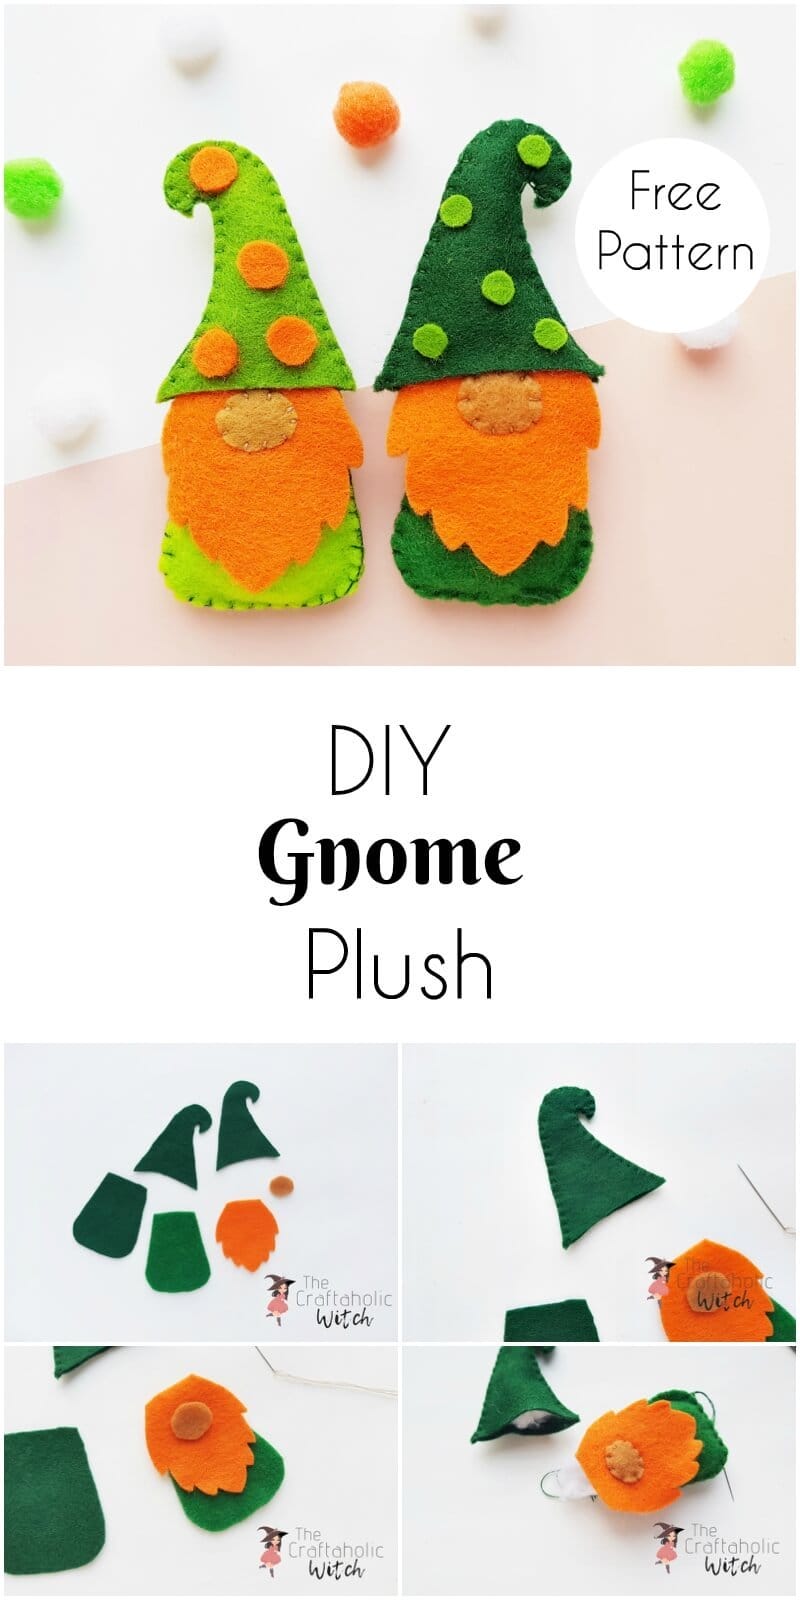 DIY Gnome Plush - Learn How to Make a Gnome Step by Step